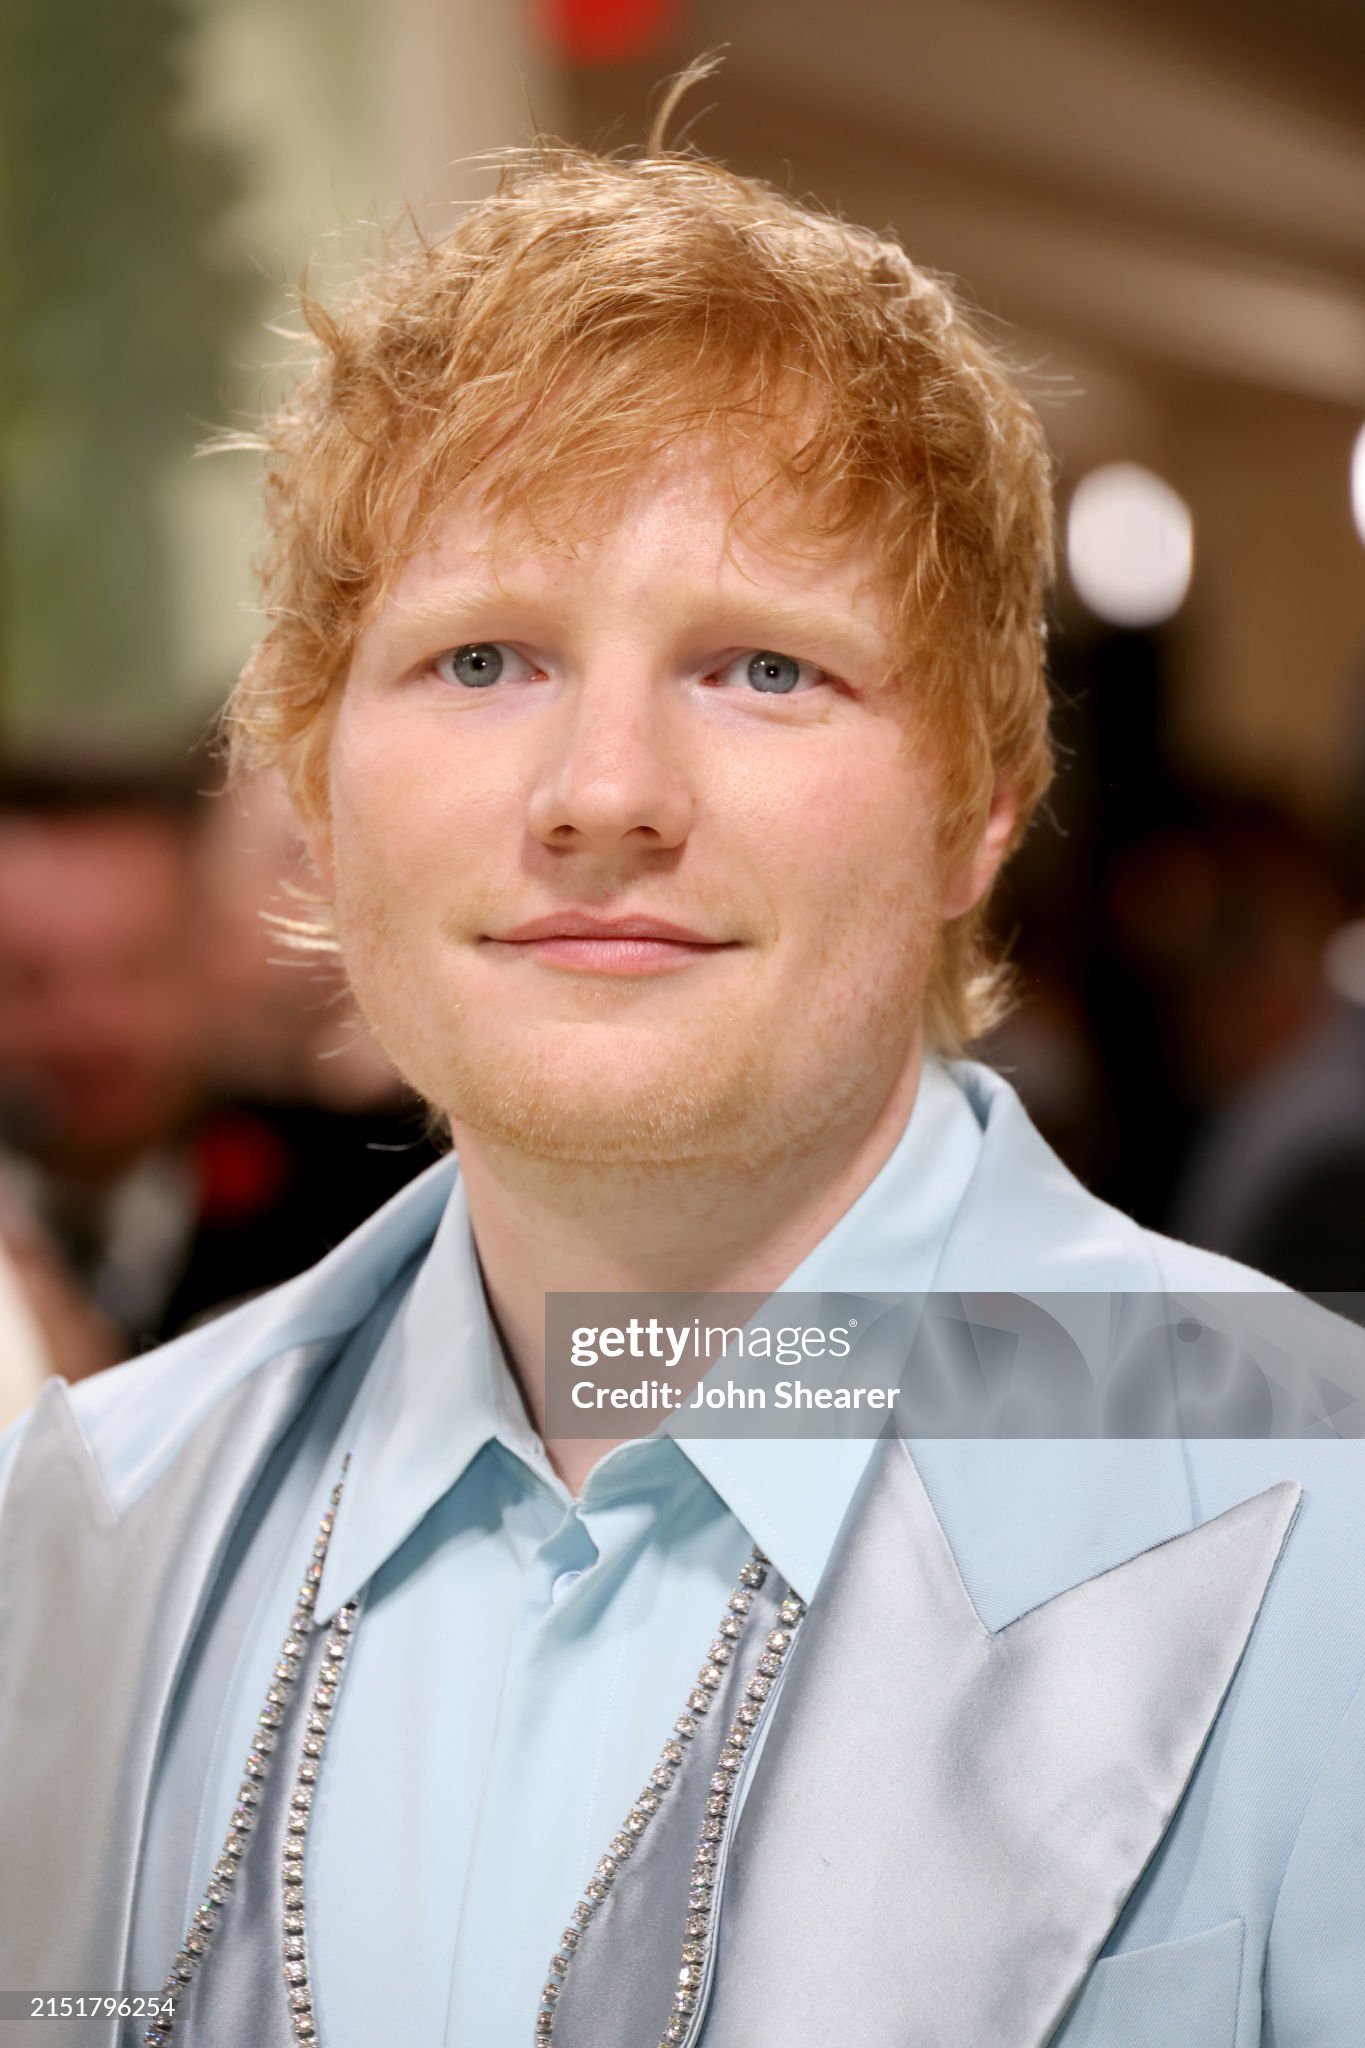 gettyimages-2151796254-2048x2048.jpg